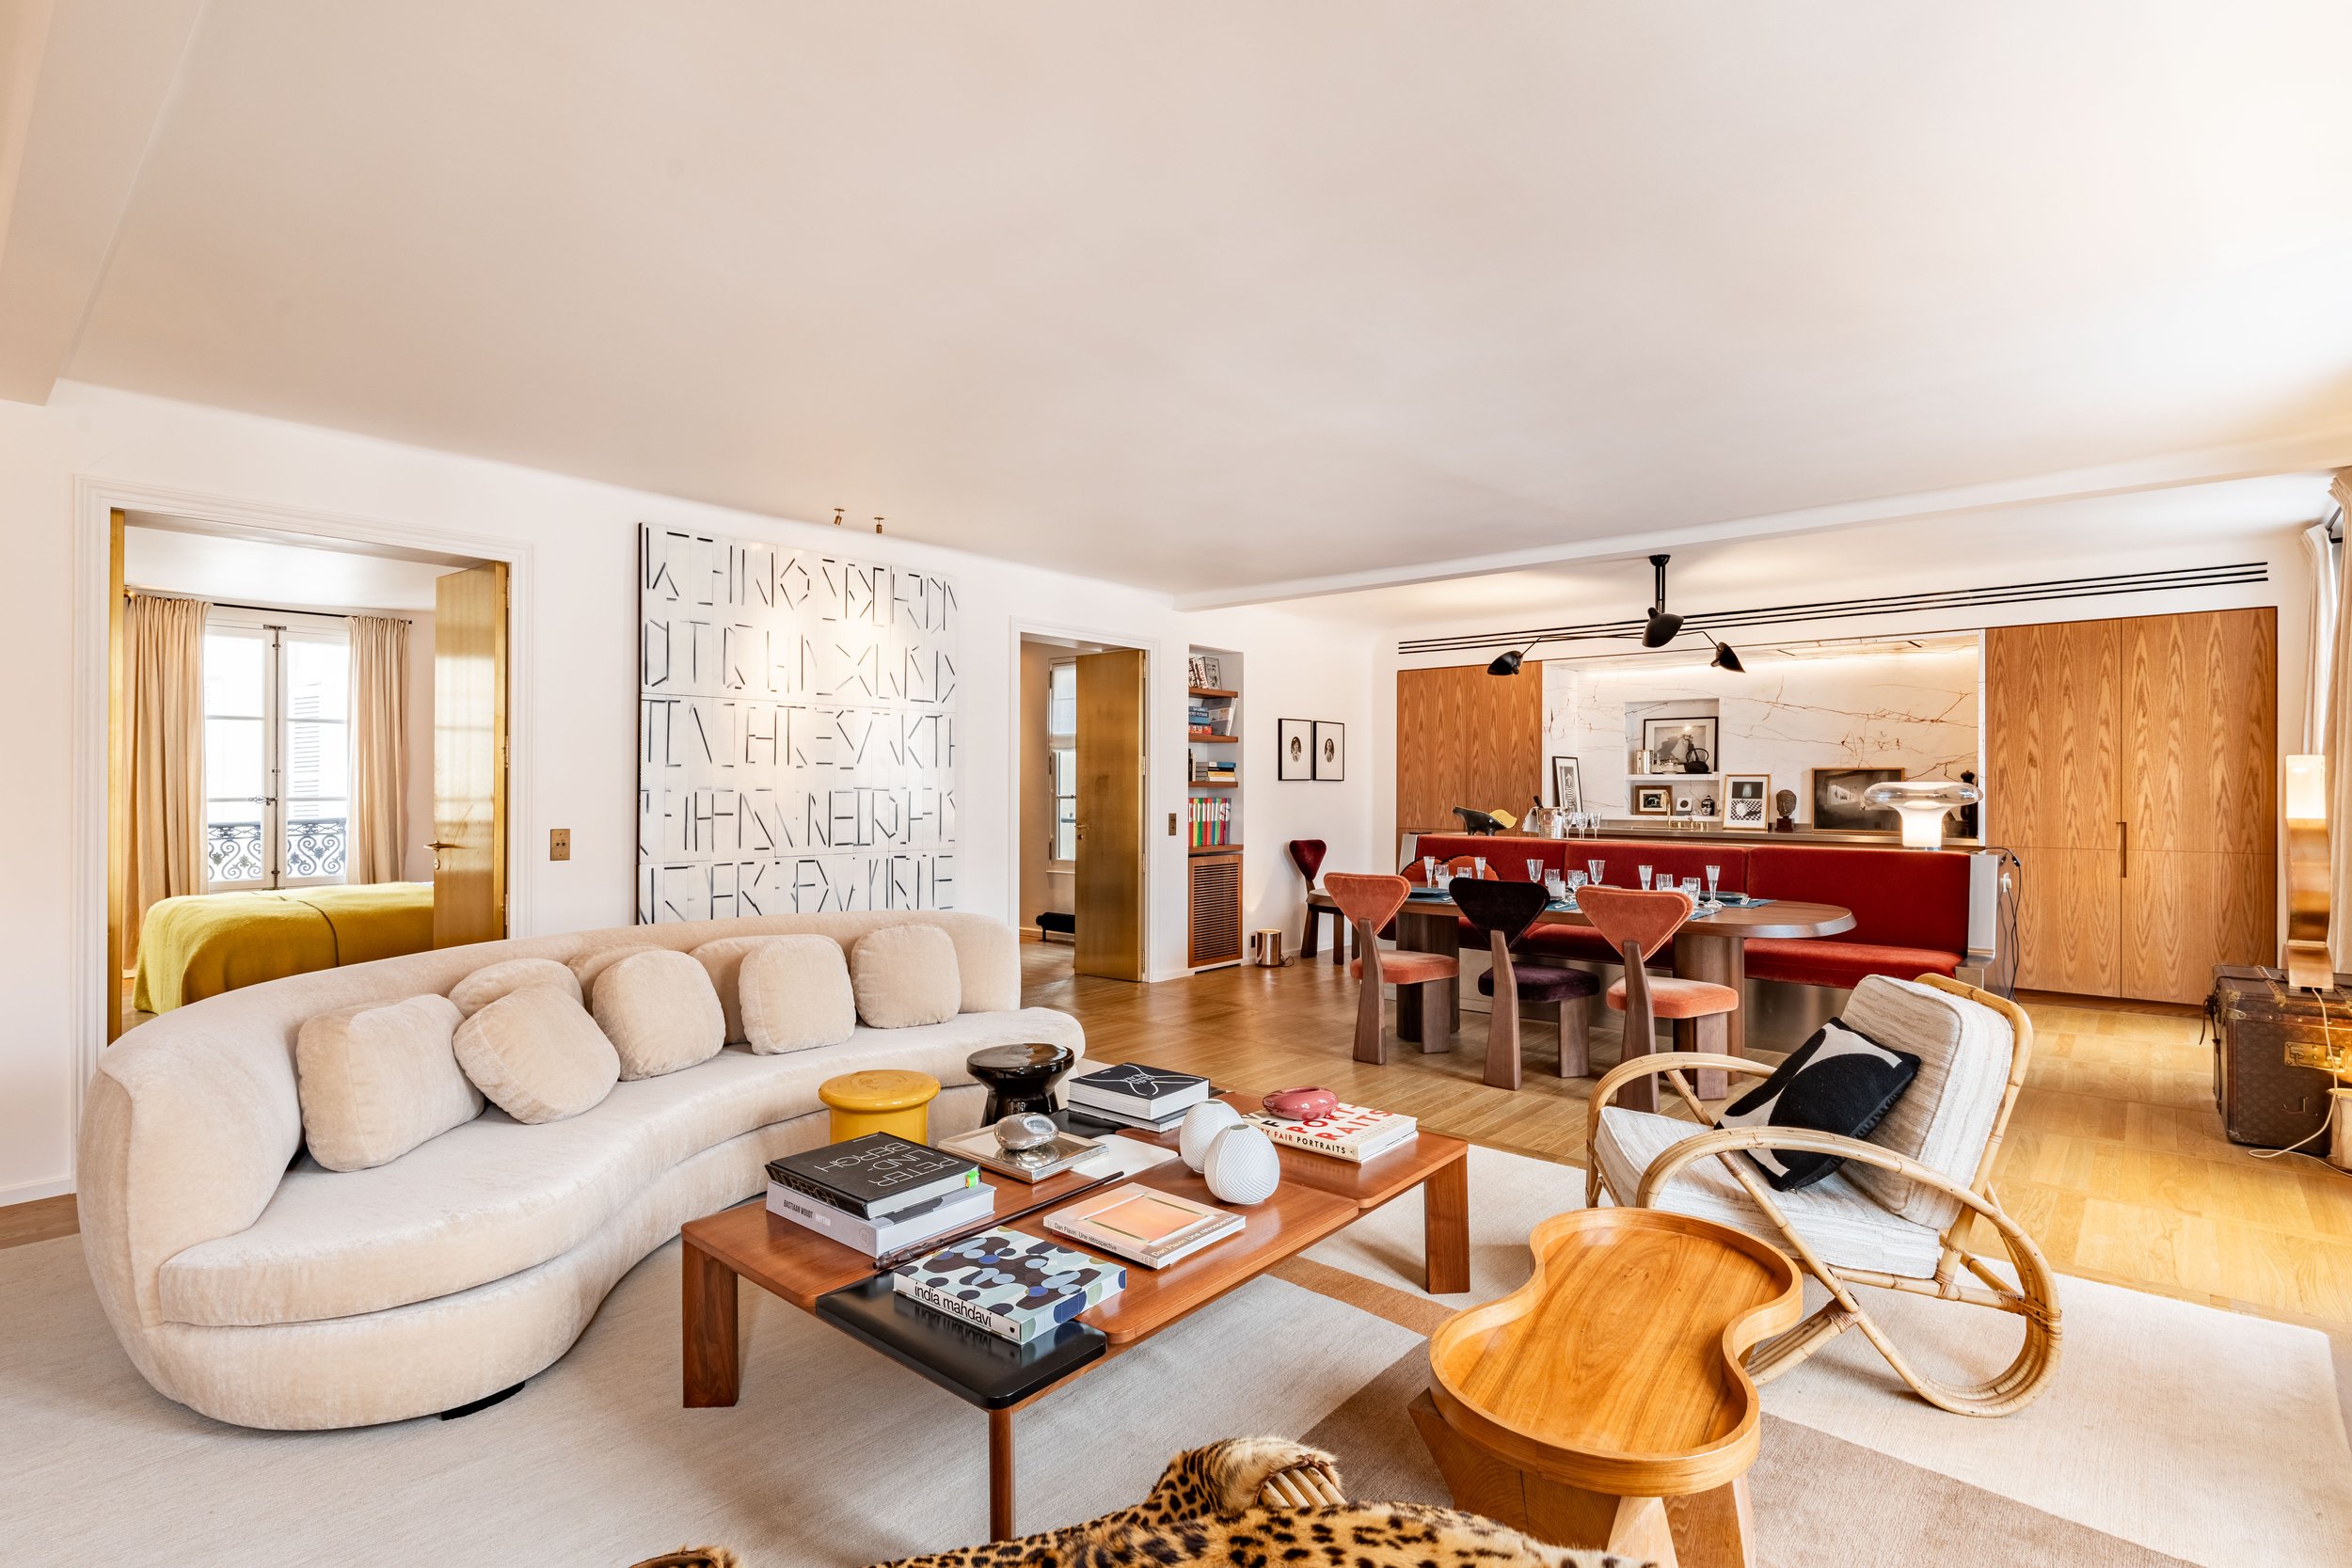 Luxury apartment for rent in Paris for the 2024 Olympic Games